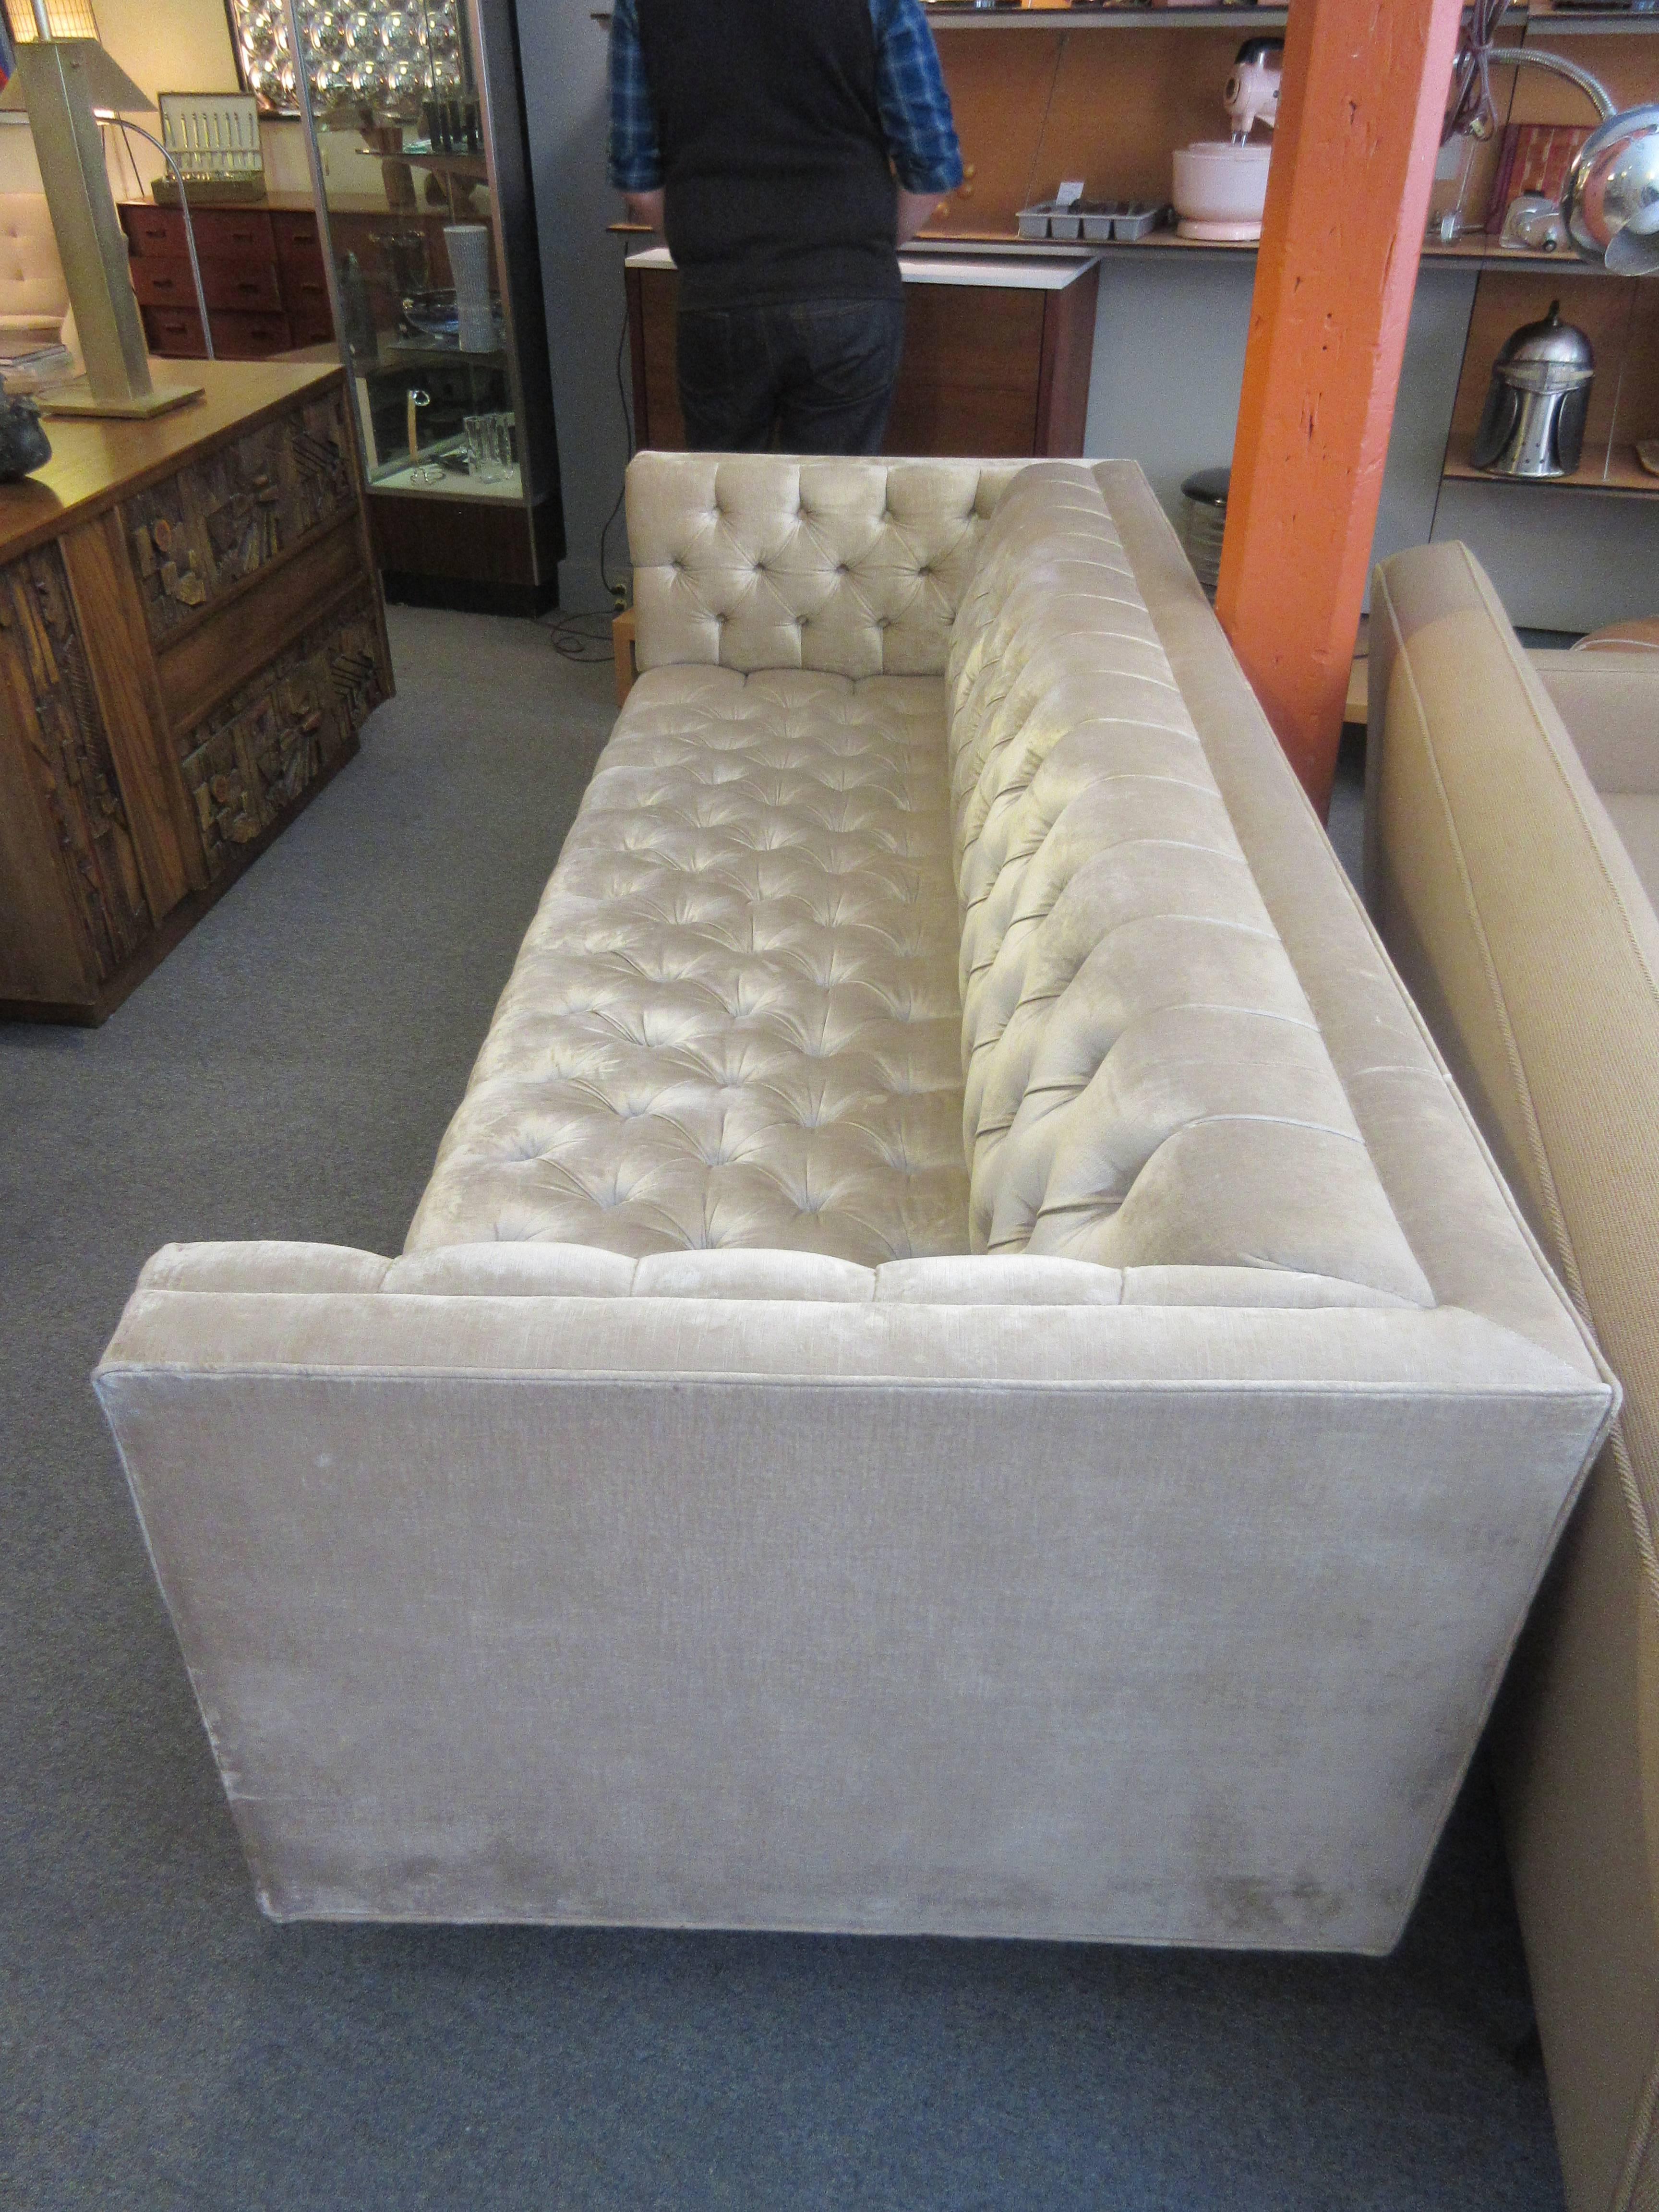 Three years old and never used in champagne velvet with wooden frame and hand tied springs gives a modern twist to the classic Chesterfield form. Thin square steel legs make it seem to float over your floor.